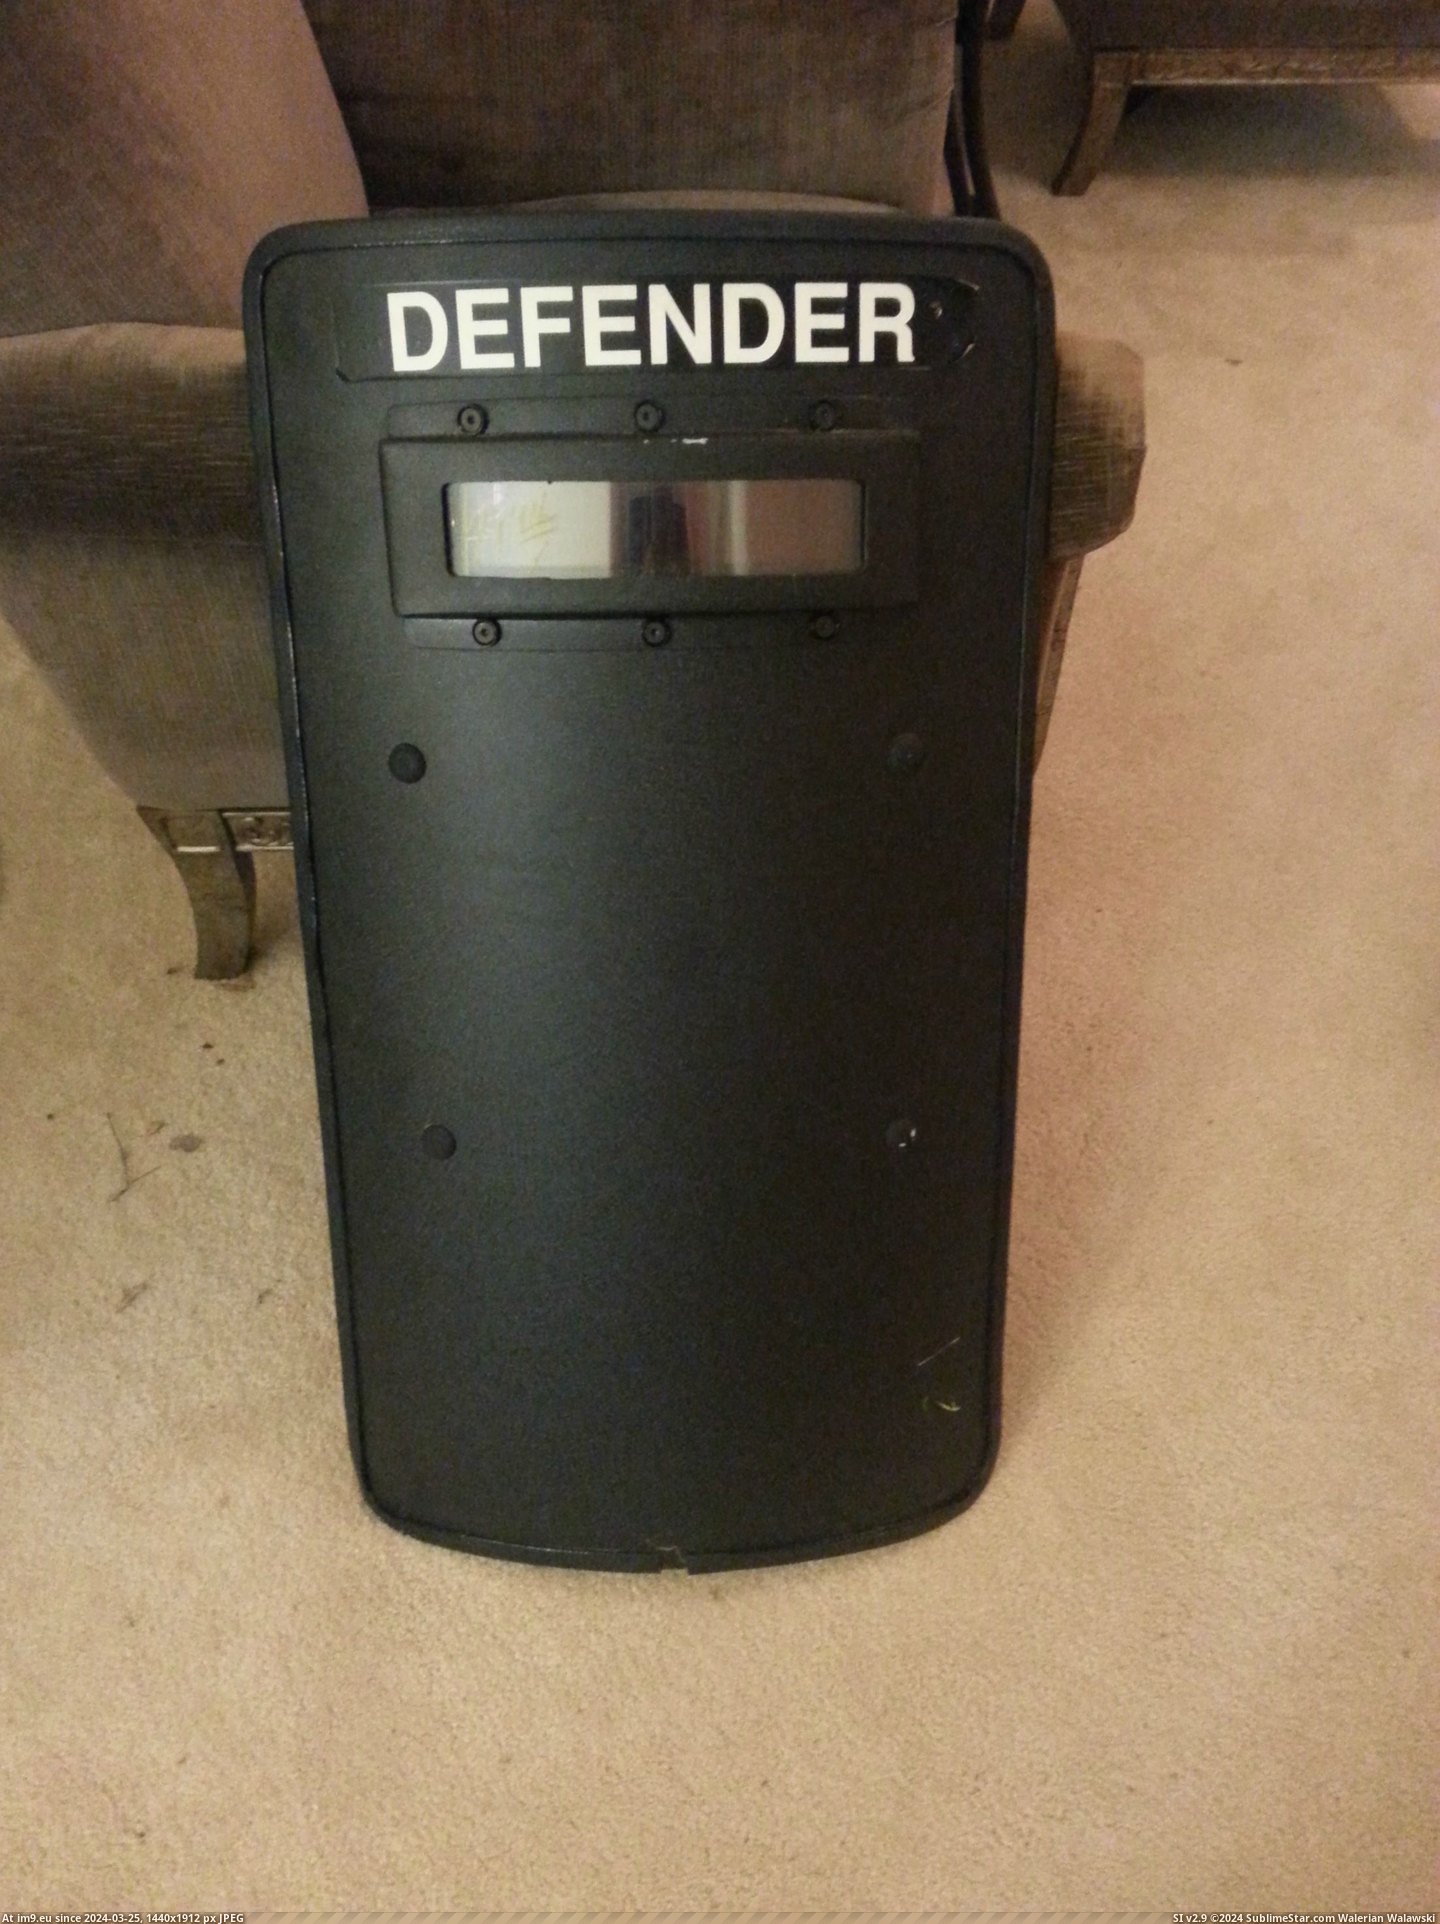 #Awesome #Find #Give #Riot #Shield #Resistant #Completely #Bullet #Goodwill [Pics] My awesome $40 Goodwill find: 'Completely bullet resistant' riot shield. Who would give this away? 4 Pic. (Obraz z album My r/PICS favs))